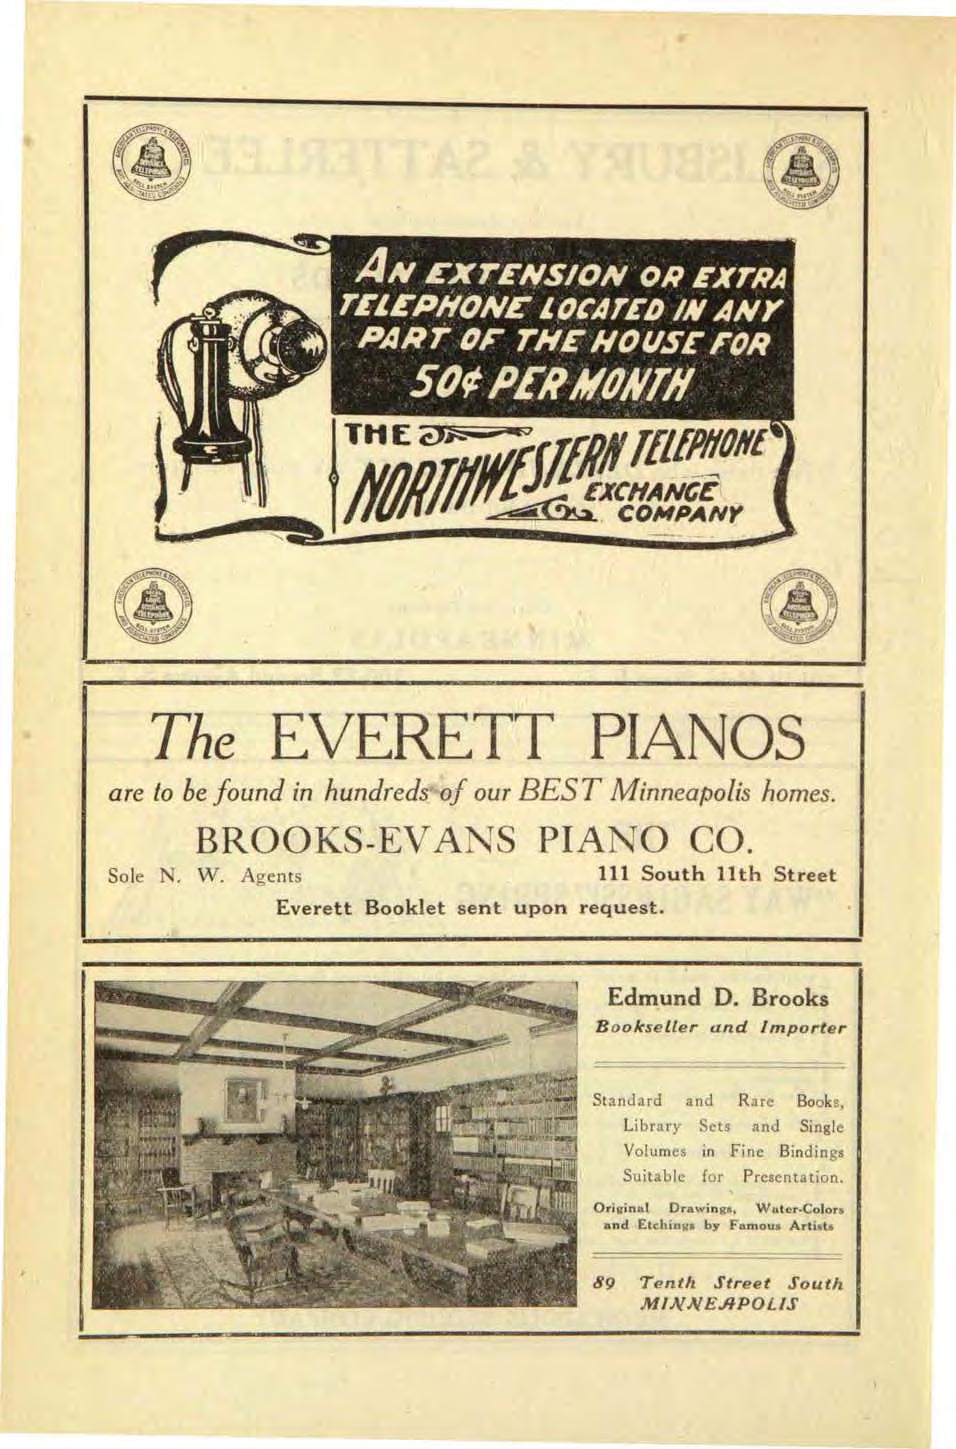 The EVERETT PIANOS are to be found in hundreds of our BES T Minneapolis homes. BROOKS-EVANS PIANO CO. Sole N. W. Agents 111 South 11th Street Everett Booklet sent upon request. Edmund D.